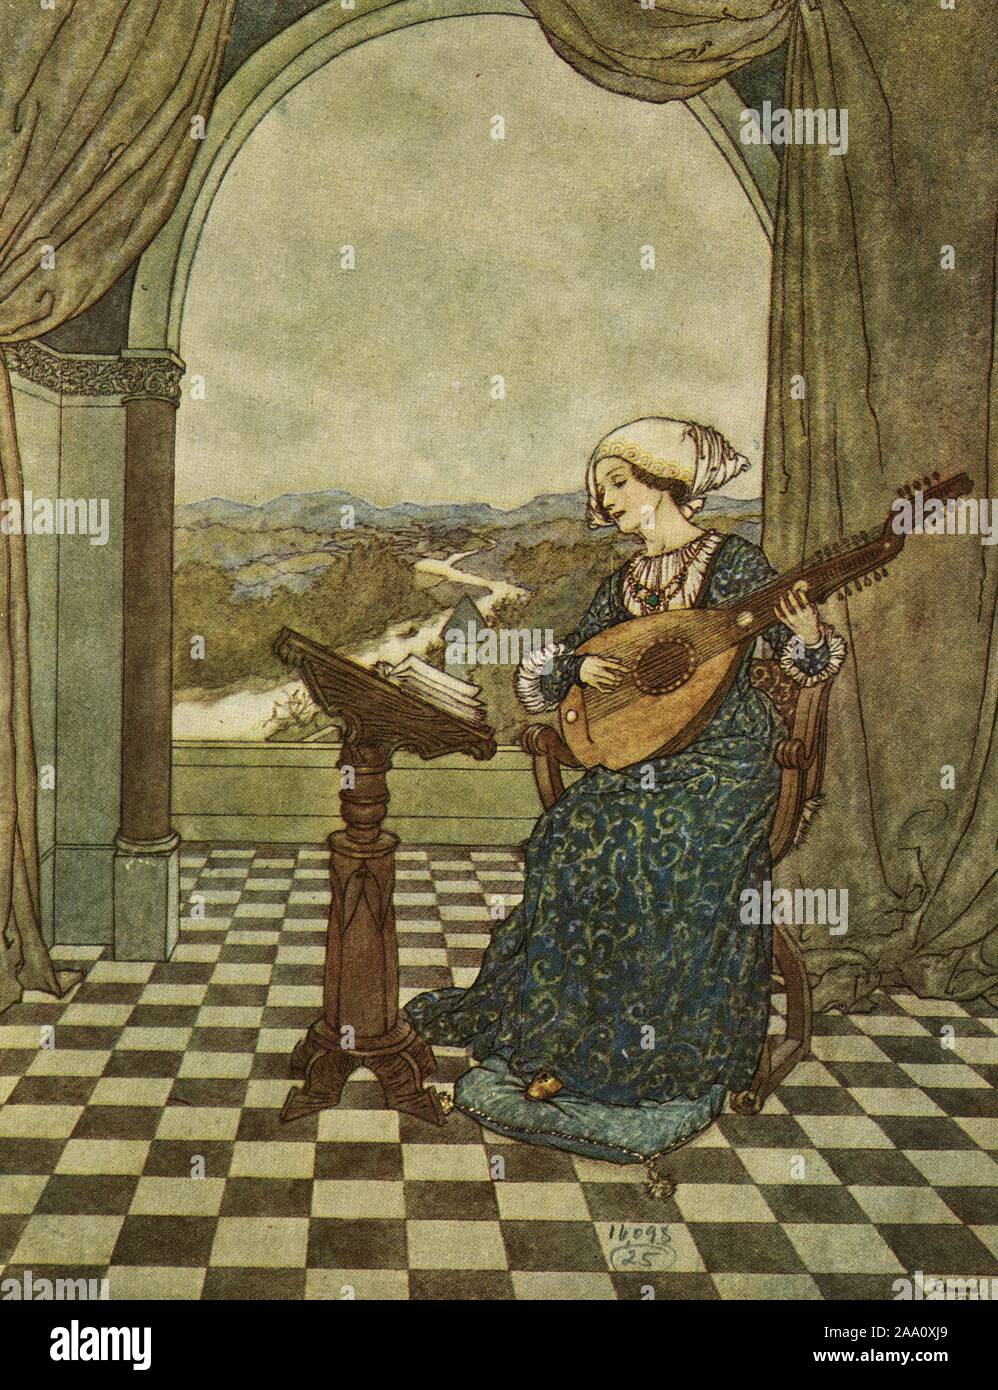 Illustration of the tale 'The Wind's Tale' by Hans Christian Andersen, featuring a lady sitting by a window playing a lute, by artist Edmund Dulac, from the book published by Hodder and Stoughton, 1911. From the New York Public Library. () Stock Photo